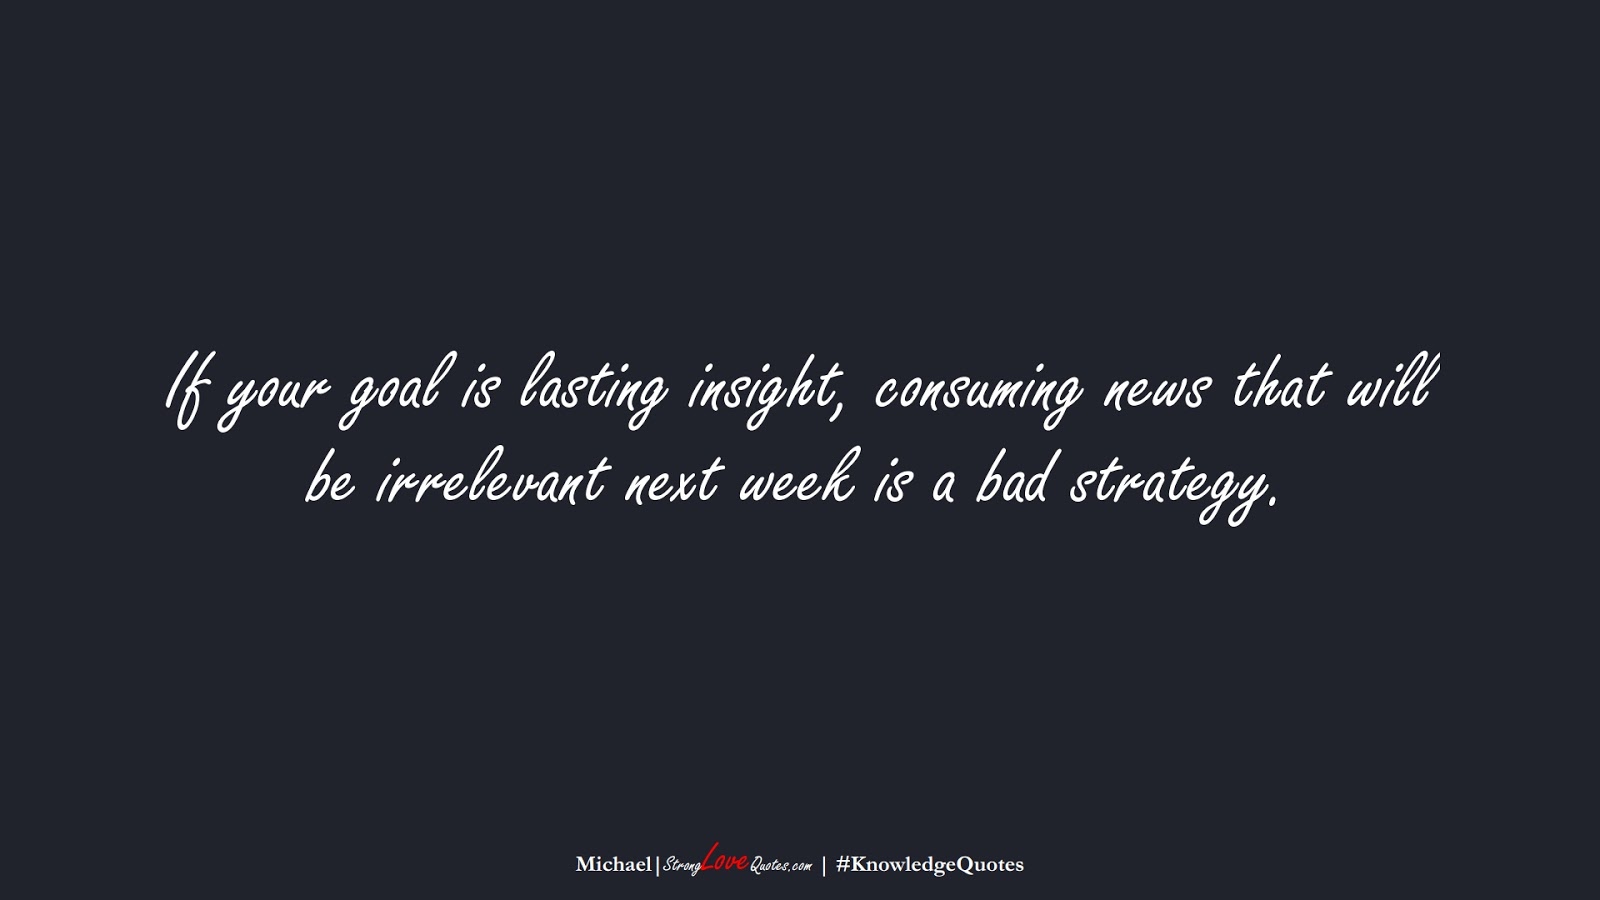 If your goal is lasting insight, consuming news that will be irrelevant next week is a bad strategy. (Michael);  #KnowledgeQuotes